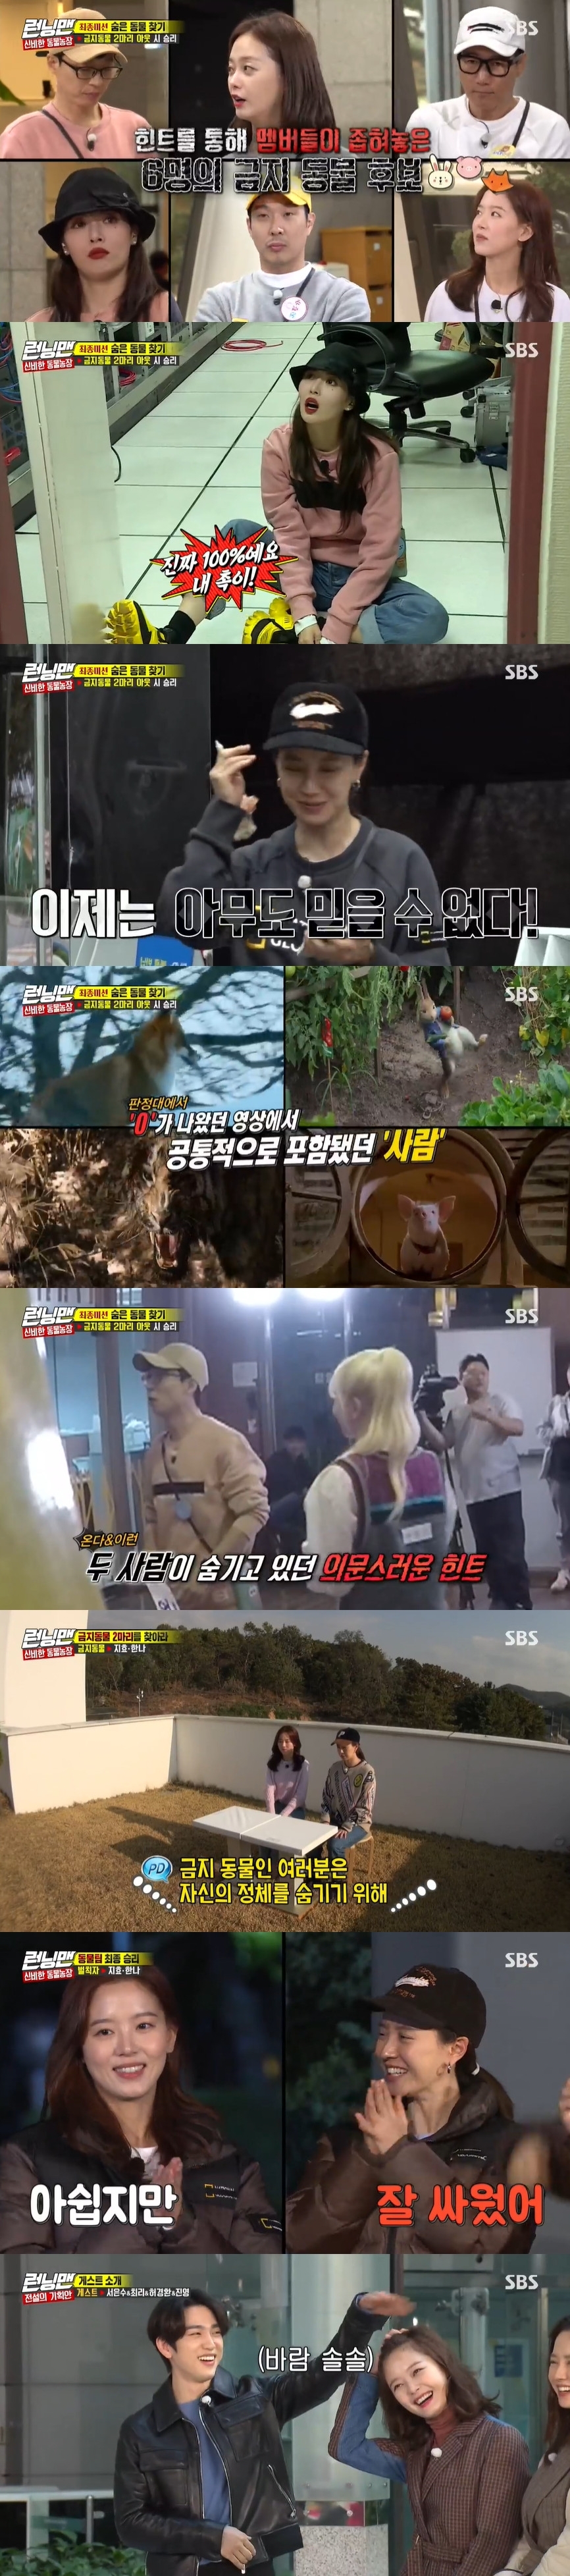 Seoul = = Kang Han-Na and Song Ji-hyo were identified as banned animals, but eventually lost to the animal team.On SBS Running Man, which was broadcasted at 5 pm on the 17th, the animal team won the title with a special feature of The Secret of the Prohibited Animals.Seo Eun-soo, Choi, Heo Kyung-hwan and GOT7 Jinyoung appeared as guests as Legendary YG Entertainment.On the day, members and guests went looking for two hidden banned animals: Kang Han-Na and Haha chased Hyuna, and Hyuna said, Kang Han-Na is the culprit.If you tear it off, the amount will disappear. Then Everglow came to the mission of the book rental shop.Lee Kwang-soo failed to carry out a mission to lift a book with his toes.Kang Han-Na also watched a movie with a rabbit and received an O when asked if there was a banned animal hidden here.When Haha, a rabbit, began to be suspected, he said, I will tear the soul, and eventually Haha ripped off the name tag of Jeon So-min.But Jeon So-min was not a banned animal, nor was Haha; so everyone began to suspect Kang Han-Na.Ji Suk-jin chased Kang Han-Na, and suddenly a shadow of question appeared and Ji Suk-jin was in-N-Out Burger.When animals in-N-Out Burgered by prohibited animals are created, there is also a closed area that is made.Later tiger Lee Guk-joo also confirmed that there are no banned animals after watching a movie featuring pigs.Lee Guk-joo suspected the same team, the photon, and Lee Guk-joo decided to take Lee Kwang-soos name tag, confirming that Yang Se-chan had O on the movie with the tiger on DVD.However, Sihyun returned to its origin, confirming that foxes are not prohibited animals.Yoo Jae-Suk came to watch DVDs but did not see it because there was no Hyuna, the same team; at the same time Hyuna ran around with Everglow Xihyun and avoided members.Eventually, after the persuasion of Yoo Jae-Suk, I decided to watch a movie with a tiger, and X appeared in a movie with a tiger and a dog.Yoo Jae-Suk said posters and movies attached to the rental shop were Murder, She Wrote, and the forbidden animal was people.But you dont know whos a person.Yoo Jae-Suk suspected that the rental shop that came to Everglow in the rental shop was closed, but he did not leave work.Yoo Jae-Suk then saw the hints in the book and Murder, She Wrote Song Ji-hyo and Kang Han-Na, while Song Ji-hyo pushed Hyuna and Xihyun into the closed area and let them drop out.The actual bullshit, Song Ji-hyo, was a person, and the Arctic fox Kang Han-Na was a person. Song Ji-hyo laughed, Its a bear, but it suits something.The two men went on a final counterattack, but eventually they were punished for defeat.Then, a special feature of Legendary YG Entertainment was held: Ji Suk-jin, who said he was going on a trip to the Czech Republic, said he had been on a trip to Vietnam. I went to Wife.My wife took a picture of me. My wife asked me if I would really go alone. I went with her. In particular, he resolved the suspicion that Kim Jong Kook joked that he had a woman last time, and Haha was surprised that he had a Dicaprio through a similar app.Guests Seo Eun-soo, Choi, Heo Kyung-hwan and GOT7 Jinyoung were on the way.Jeon So-min was shy, unable to hide his excitement when he saw Jinyoung.After the extraordinary dance of Seo Eun-soo, Jeon So-min also decided to show dance with Choi, who gave Korean dance.But Jeon So-min stopped choreographing in unexpected sweat and couldnt hide his embarrassment.Since then, we have been conducting a race to find the legendary YG Entertainment, a ghost story told by the station.The performers took charge of PD and writer of the Dalimman program and went to Kolok and Gak.Meanwhile, Running Man is broadcast every Sunday at 5 pm.